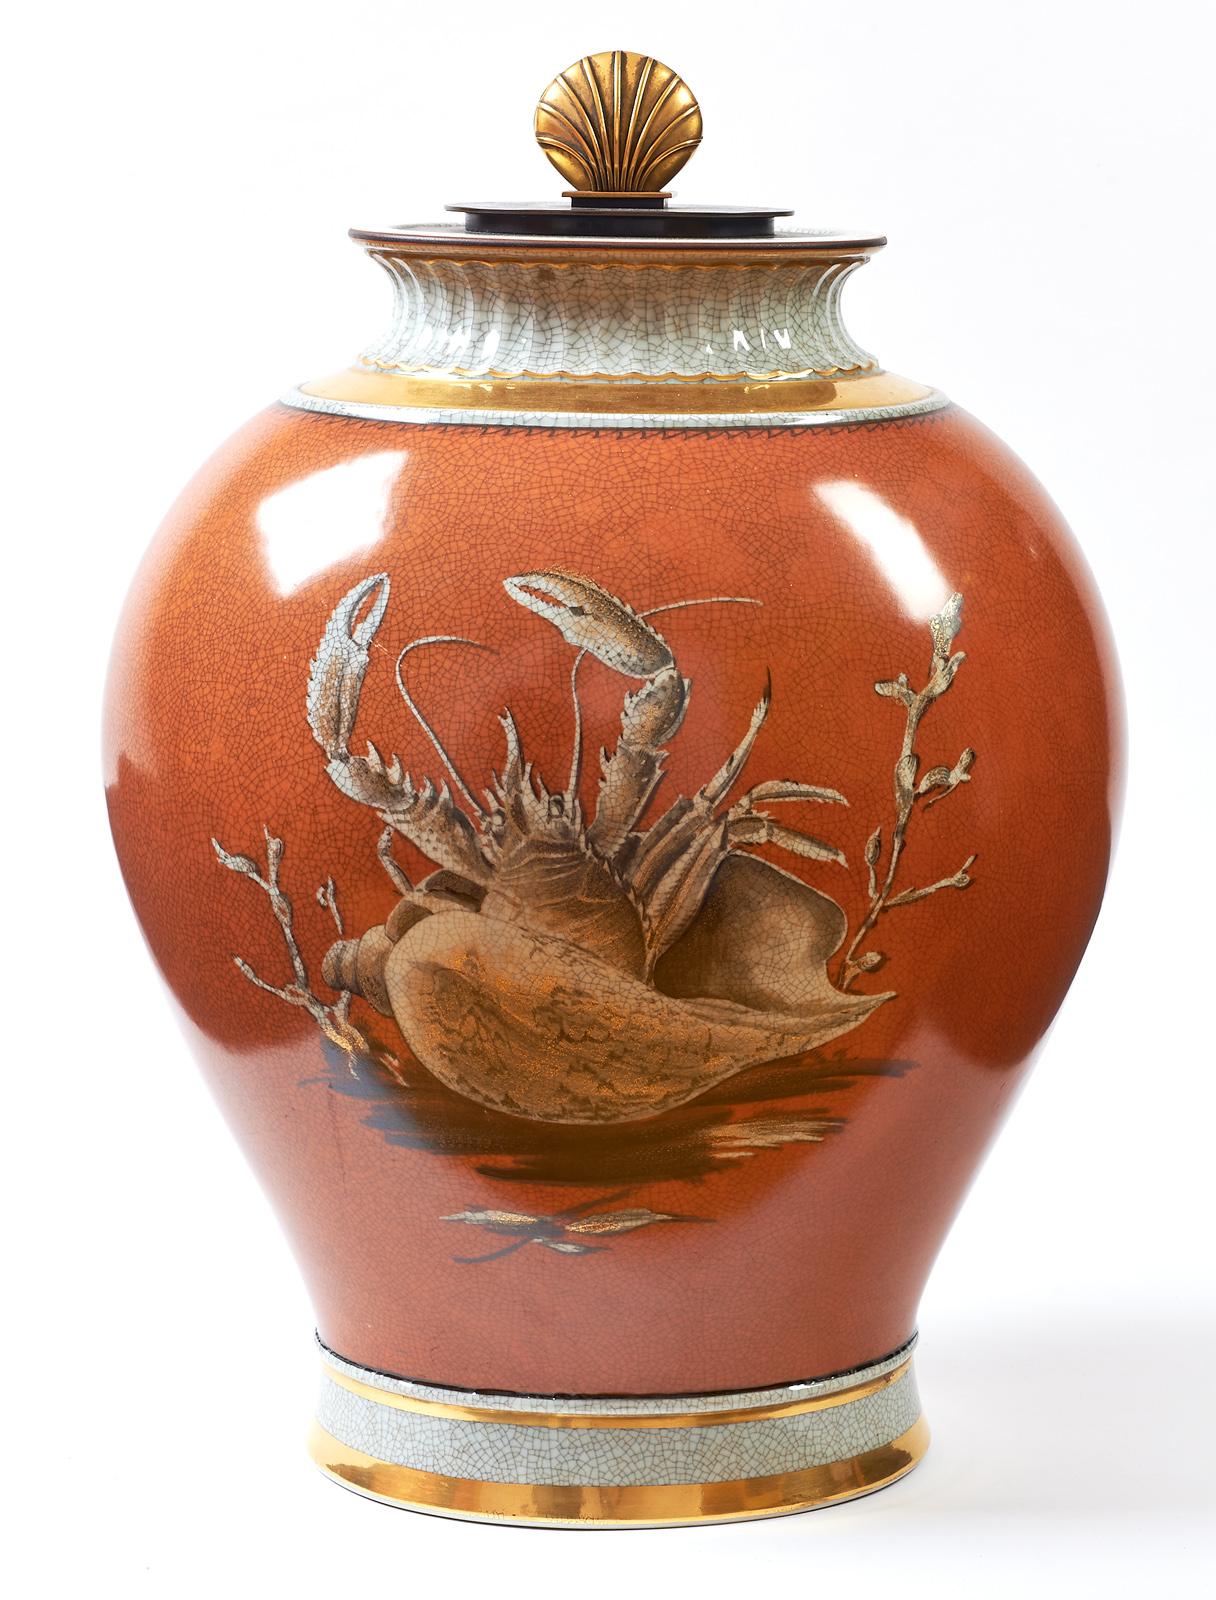 OLSEN THORKILD ( 1890-1973 ) and KNUD ANDERSON ( 1892-1966 ) FOR ROYAL COPENHAGEN
An extraordinary monumental lidded urn in Royal Copenhagen crackle ware, richly embellished with paintings of sea life by the great porcelain artist Olsen Thorkild.